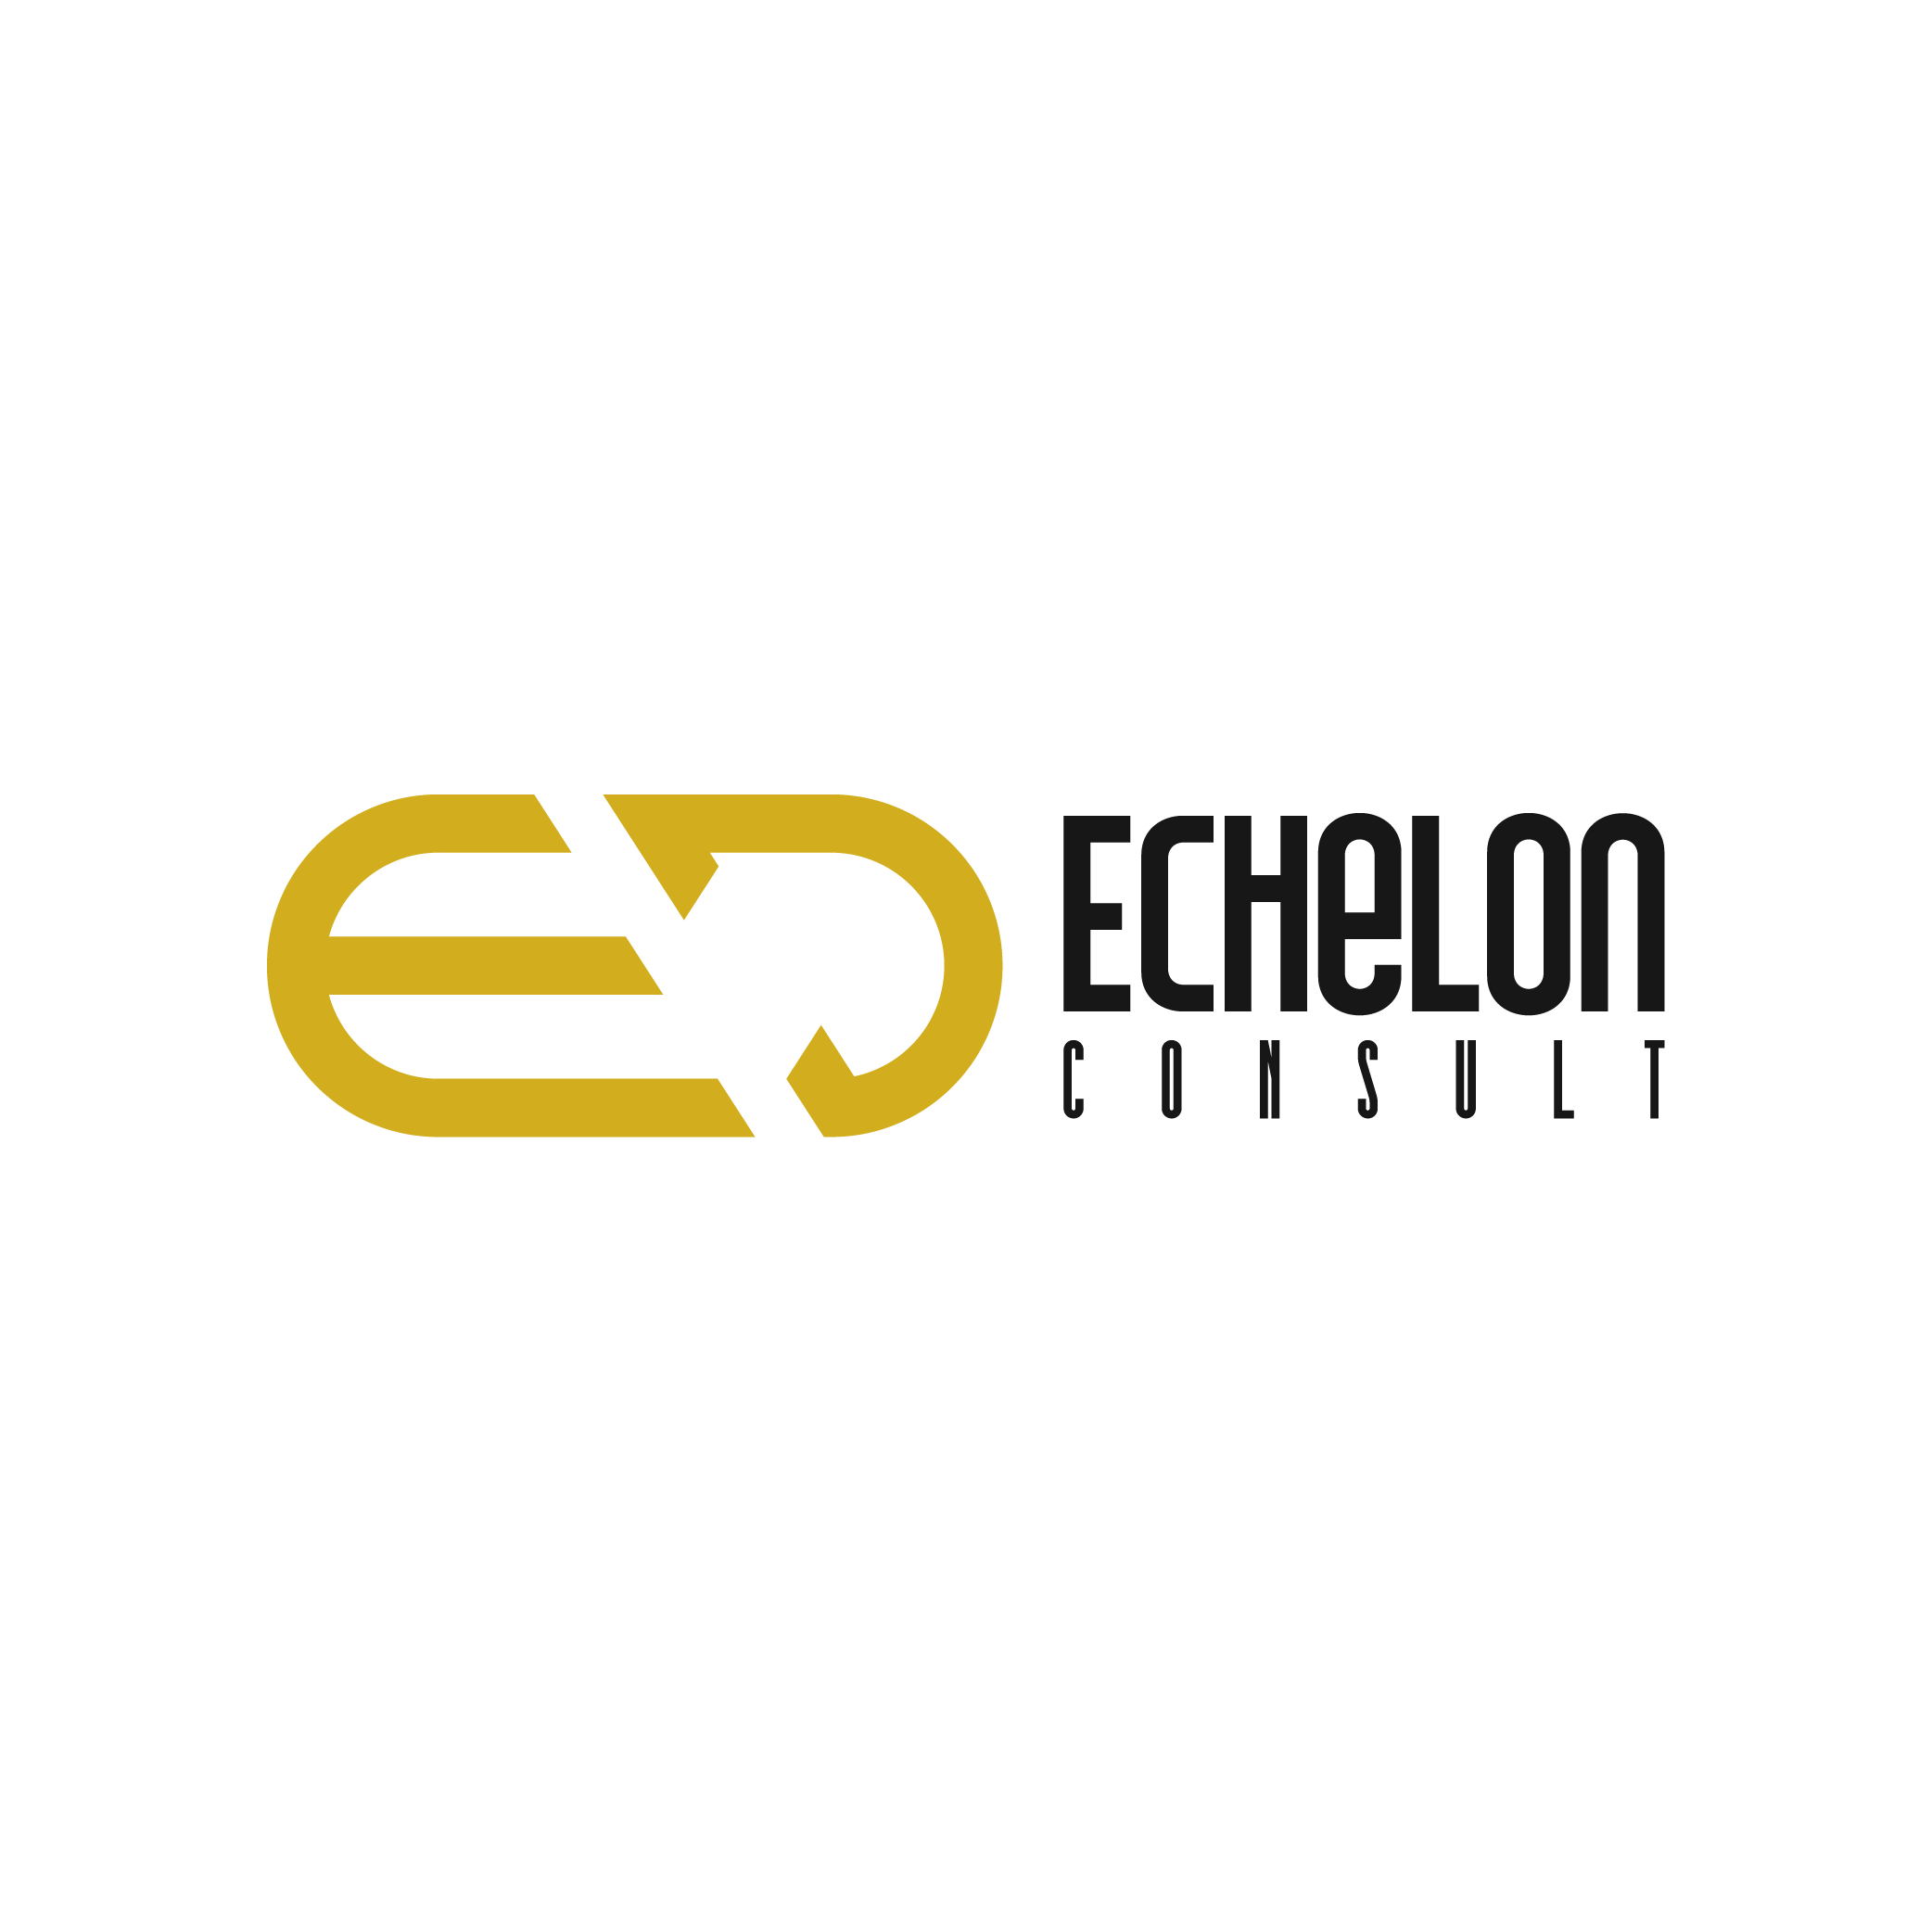 Echelon Consult Announces That it is Now Offering Fractional Services